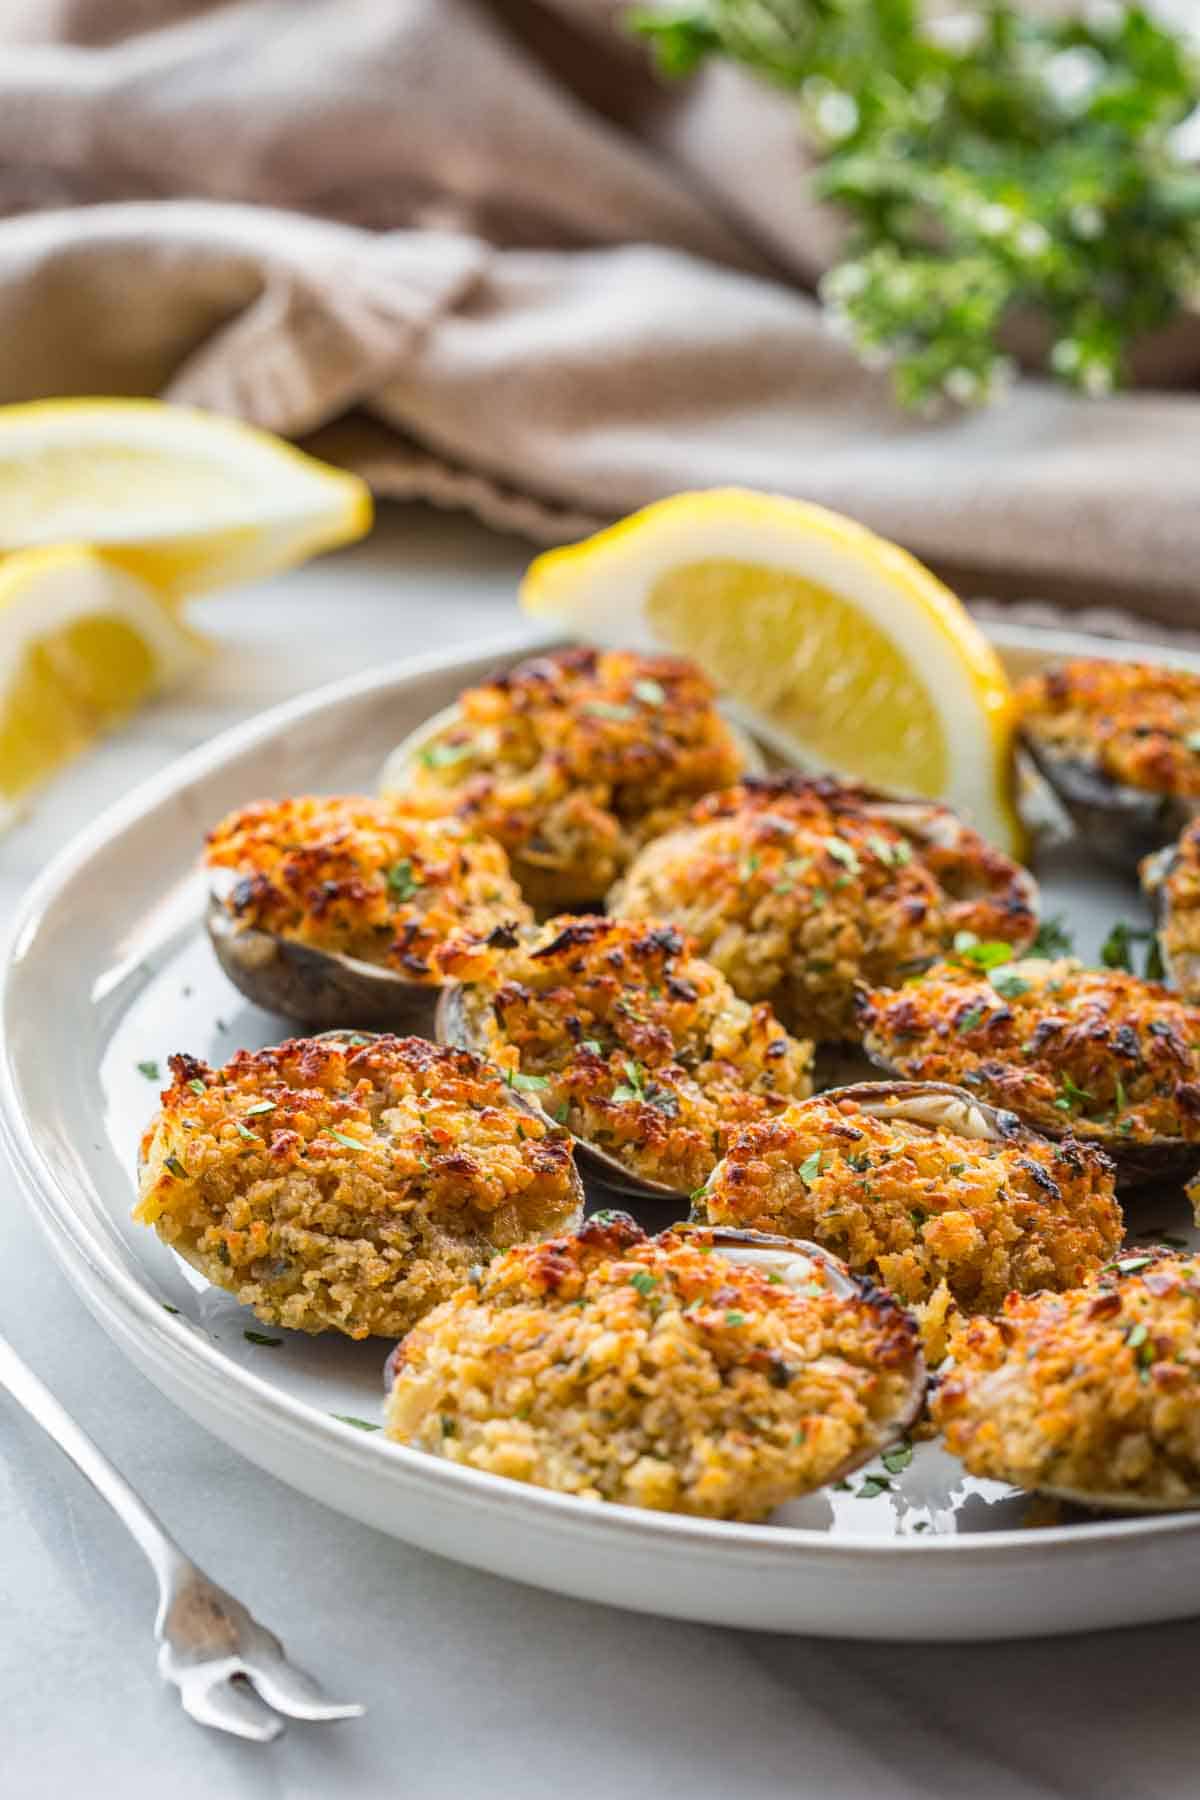 New England style stuffed clams - Caroline's Cooking